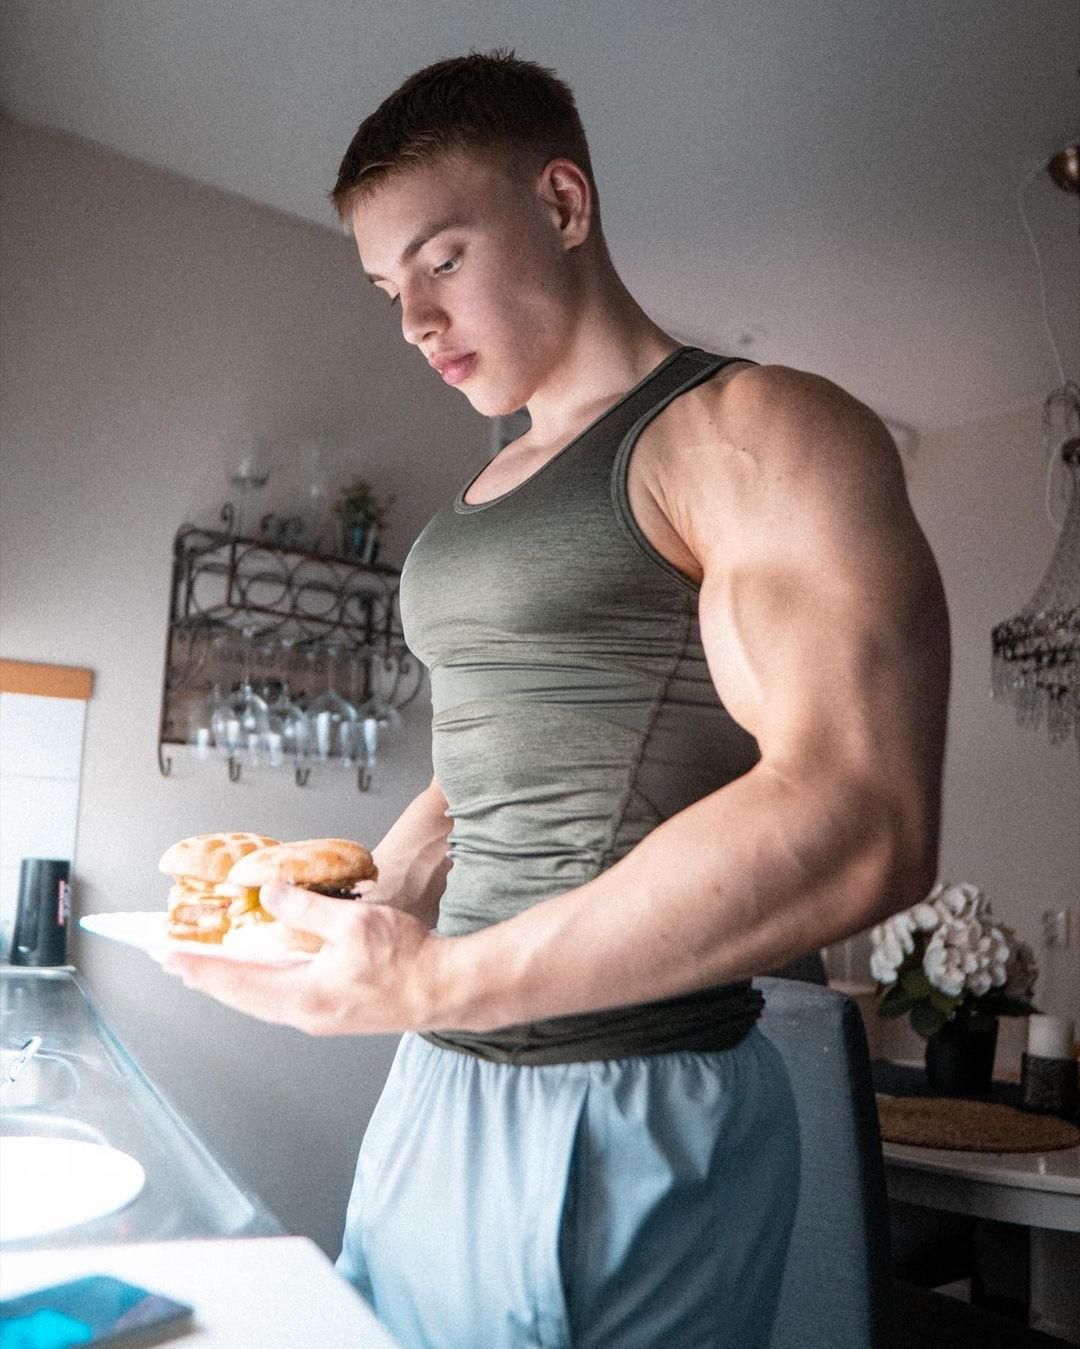 sexy-swole-teen-boy-oliver-forslin-big-biceps-young-bodybuilder-eating-burgers